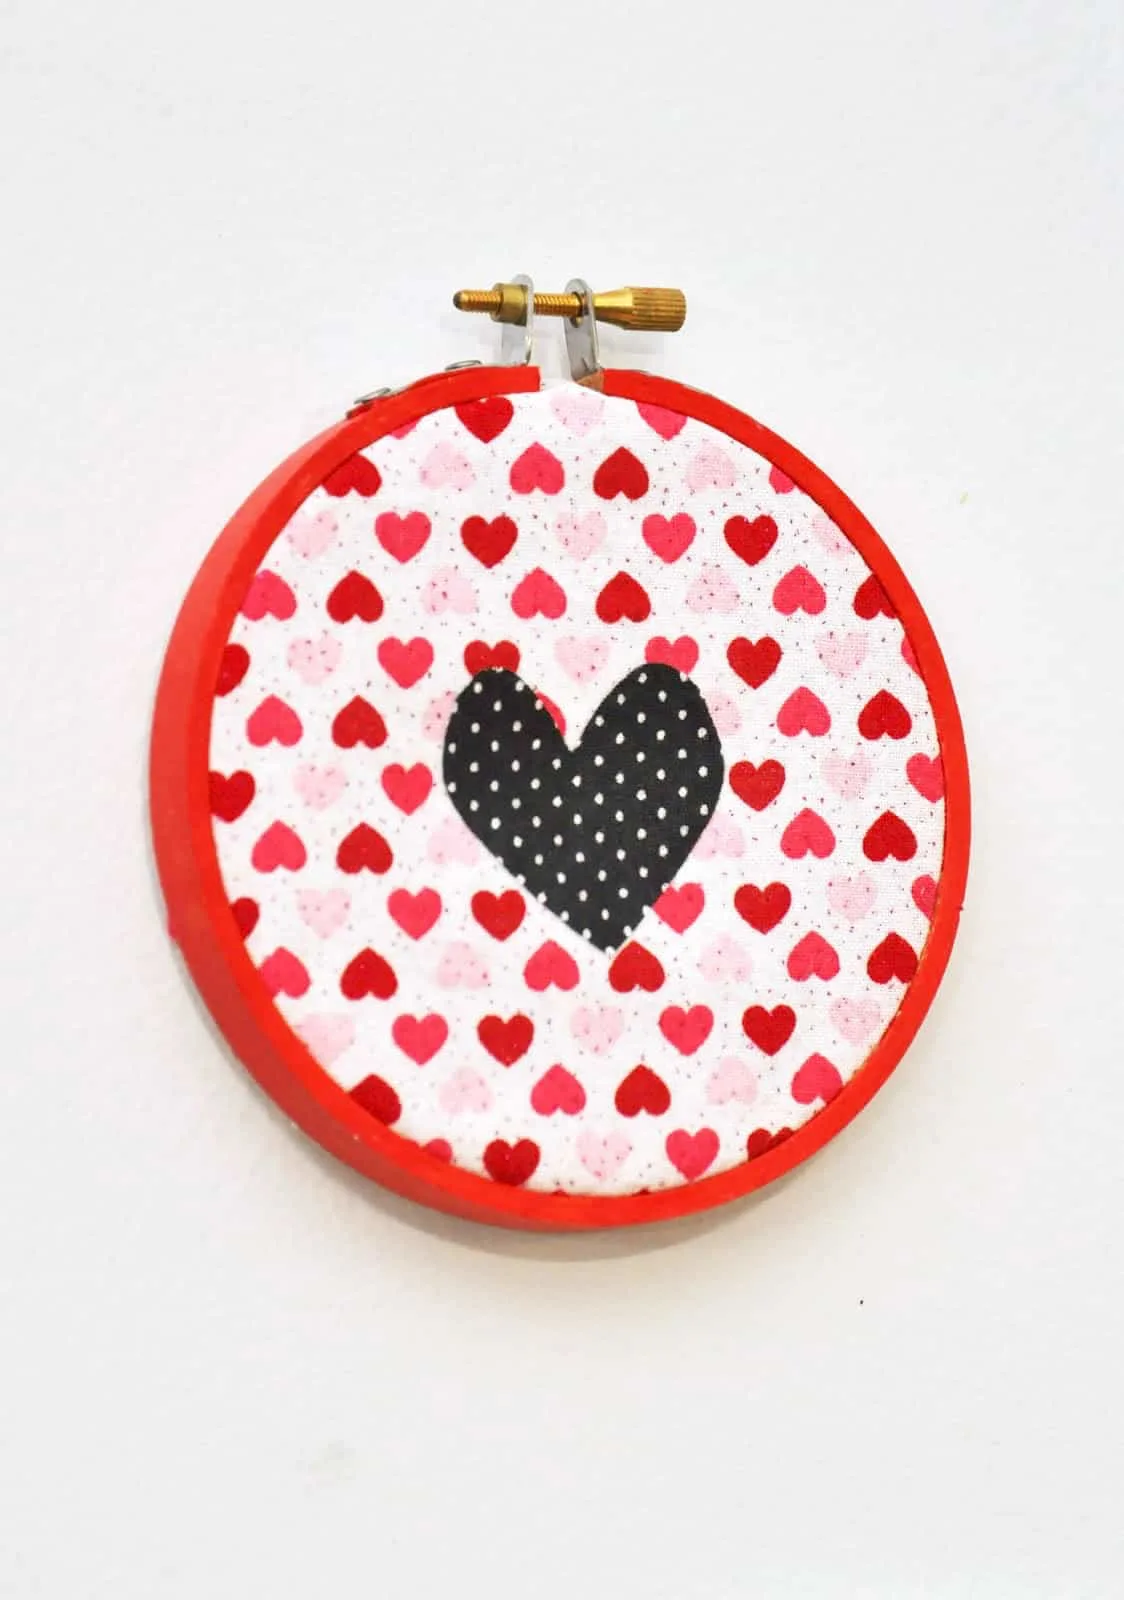 Embroidery hoop decor for Valentine's Day